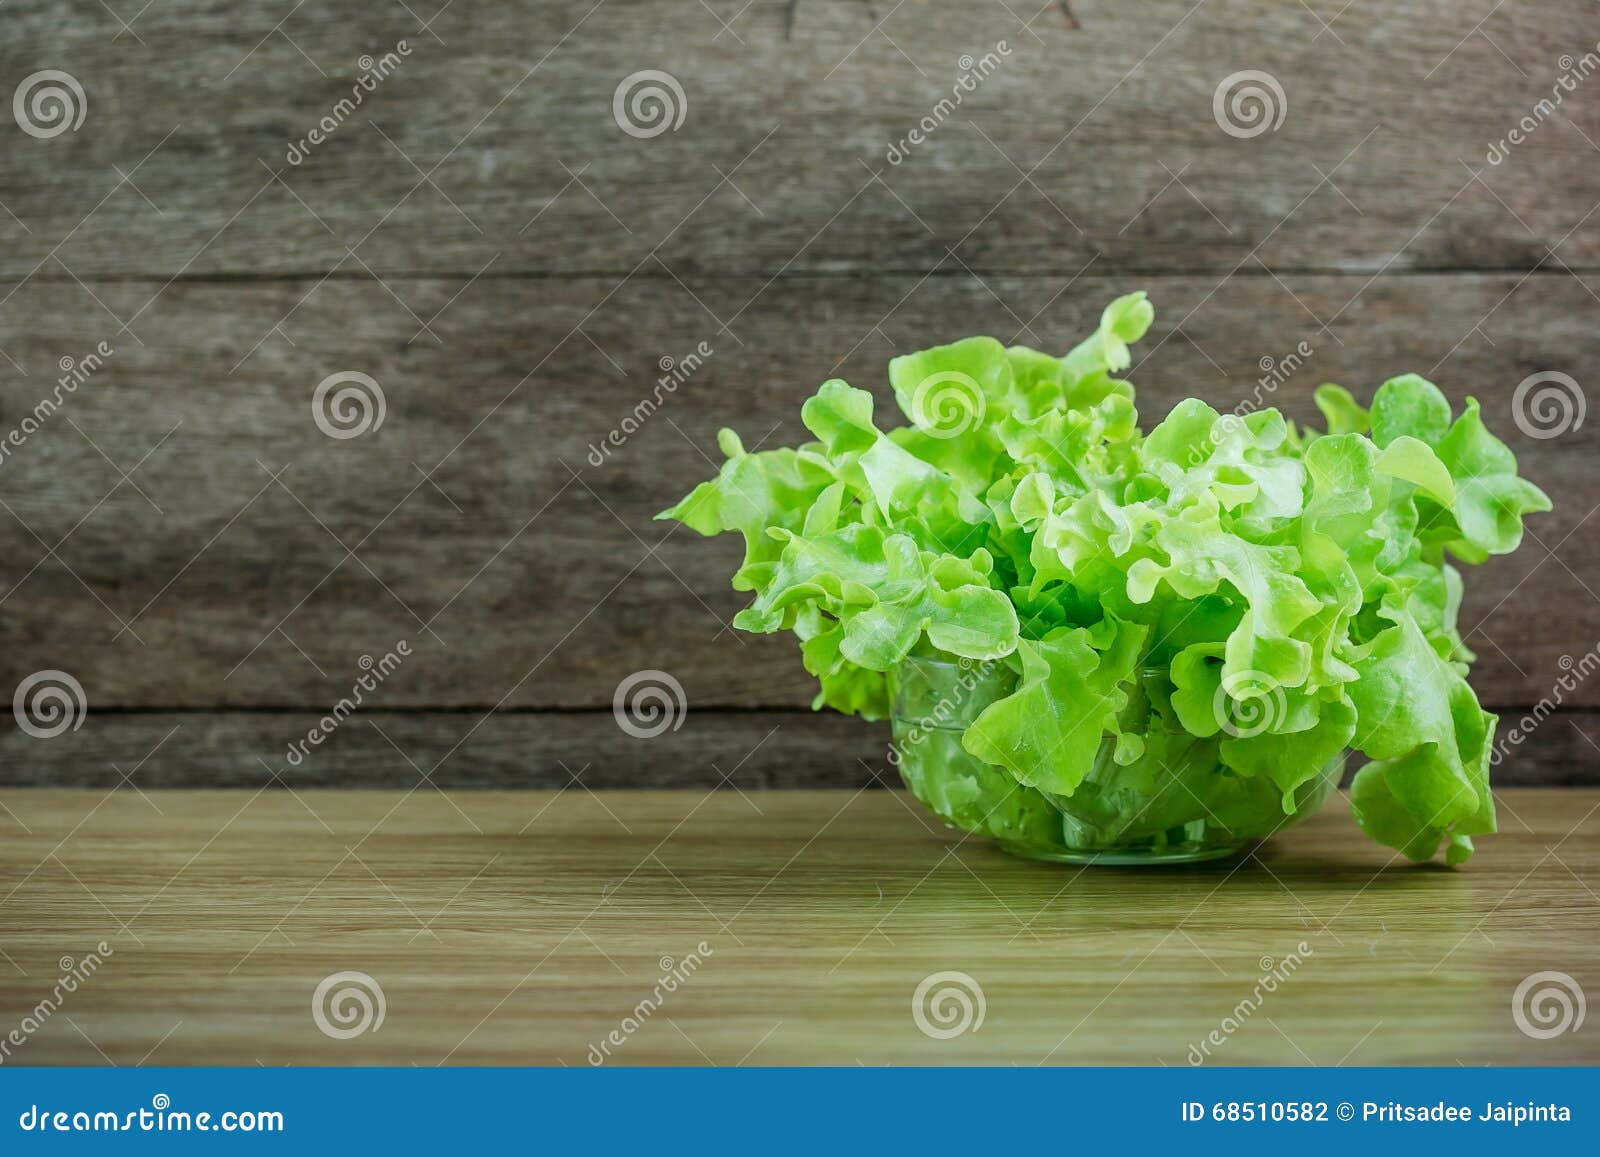 Green lettuce stock photo. Image of nutrition, nature - 68510582